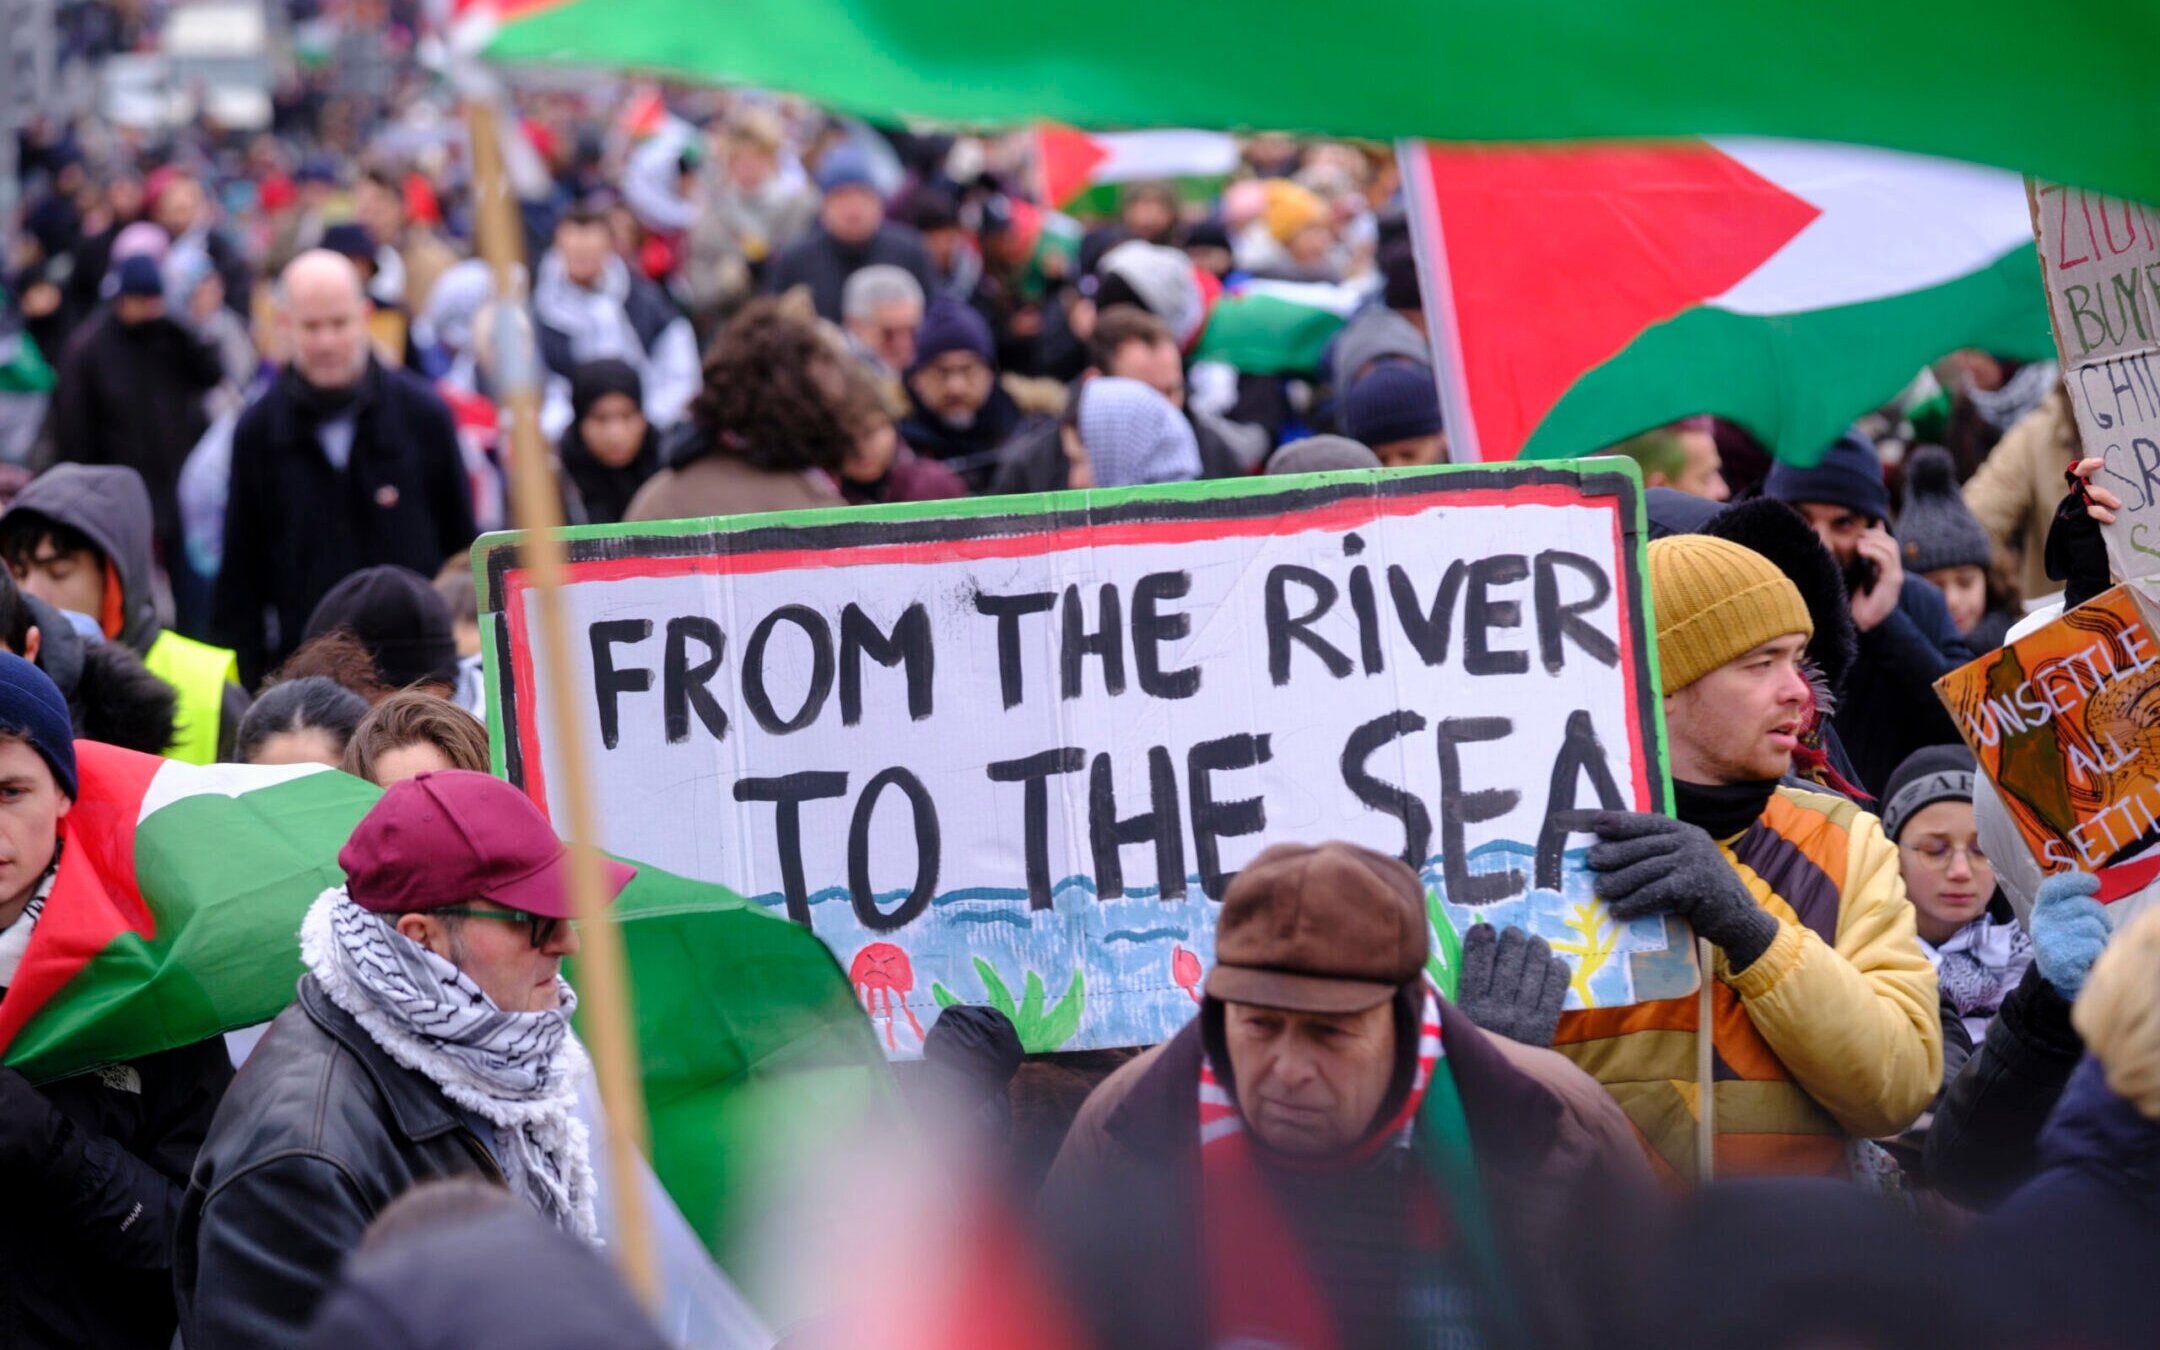 A sign reading “From the river to the sea” can be seen in a pro-Palestinian demonstration in Brussels, Belgium, Jan. 21, 2024 (Thierry Monasse/Getty Images)